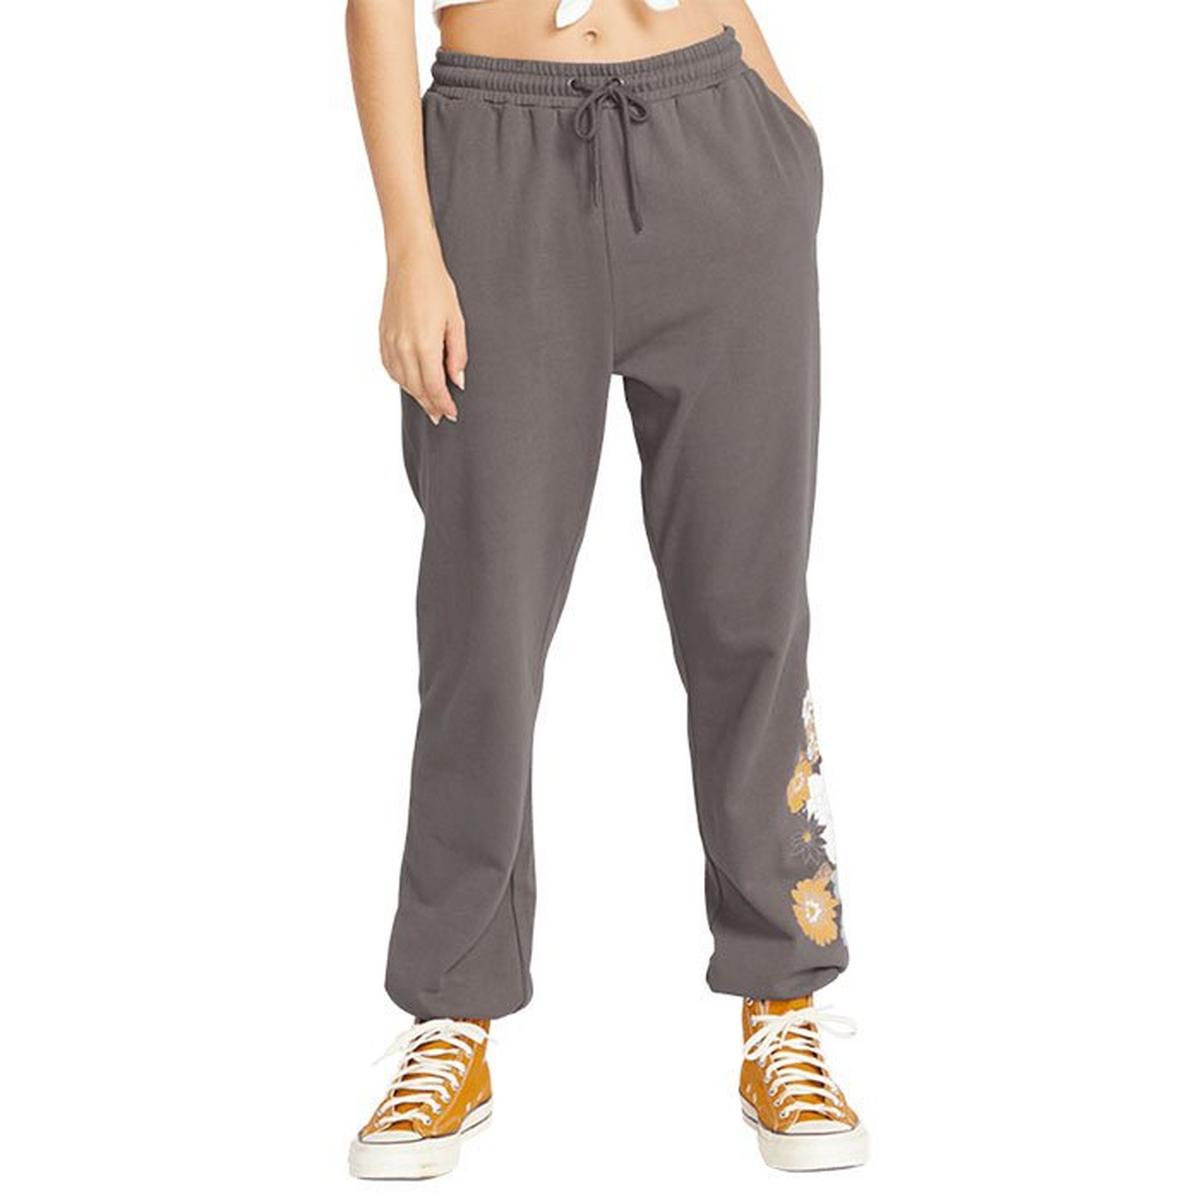 Women's Truly Stoked Pant